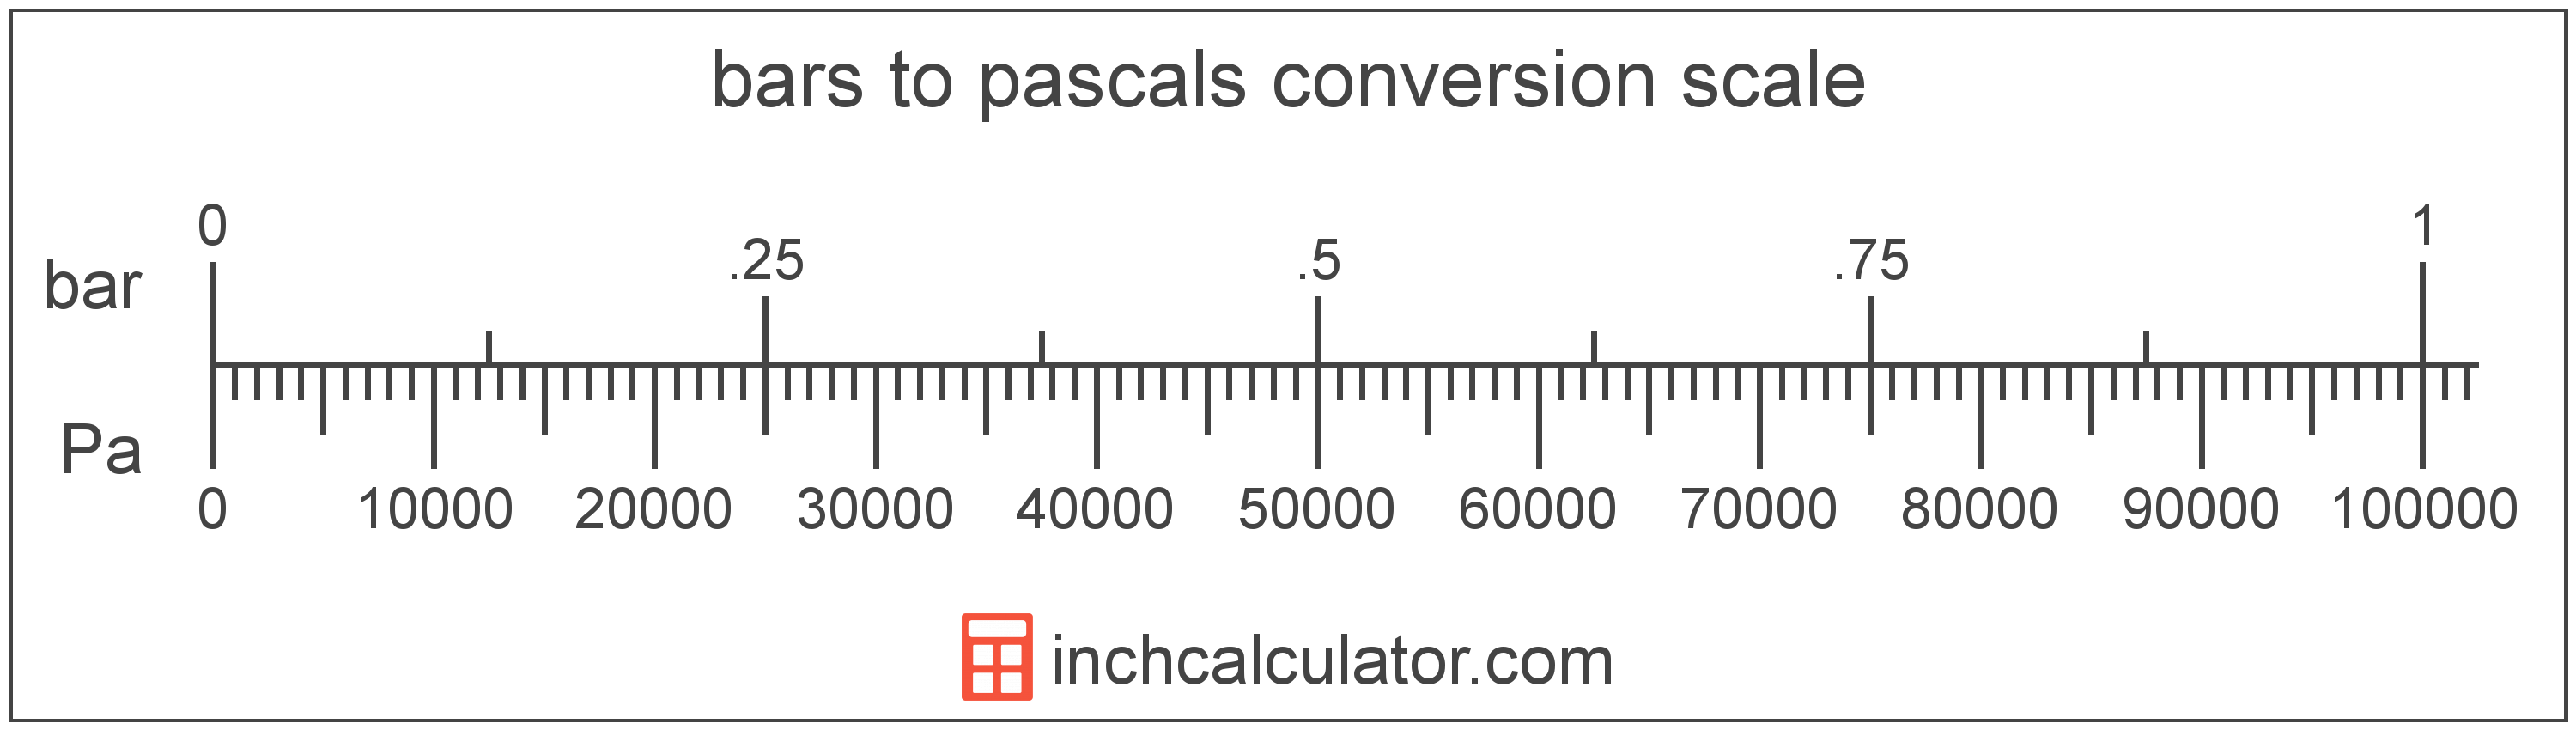 conversion scale showing pascals and equivalent bars pressure values